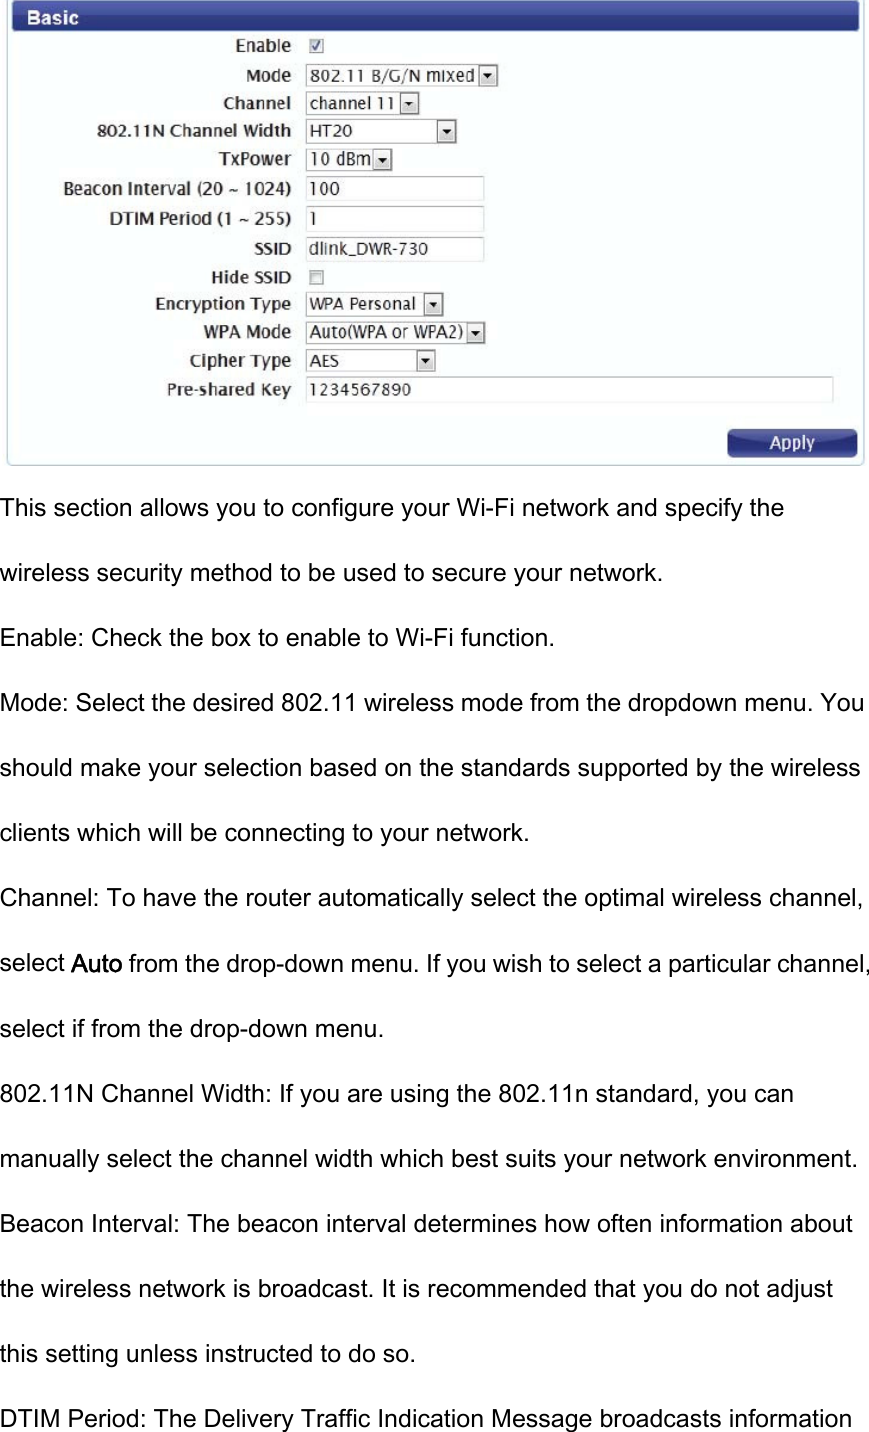  This section allows you to configure your Wi-Fi network and specify the wireless security method to be used to secure your network. Enable: Check the box to enable to Wi-Fi function. Mode: Select the desired 802.11 wireless mode from the dropdown menu. You should make your selection based on the standards supported by the wireless clients which will be connecting to your network. Channel: To have the router automatically select the optimal wireless channel, select Auto from the drop-down menu. If you wish to select a particular channel, select if from the drop-down menu. 802.11N Channel Width: If you are using the 802.11n standard, you can manually select the channel width which best suits your network environment. Beacon Interval: The beacon interval determines how often information about the wireless network is broadcast. It is recommended that you do not adjust this setting unless instructed to do so. DTIM Period: The Delivery Traffic Indication Message broadcasts information 